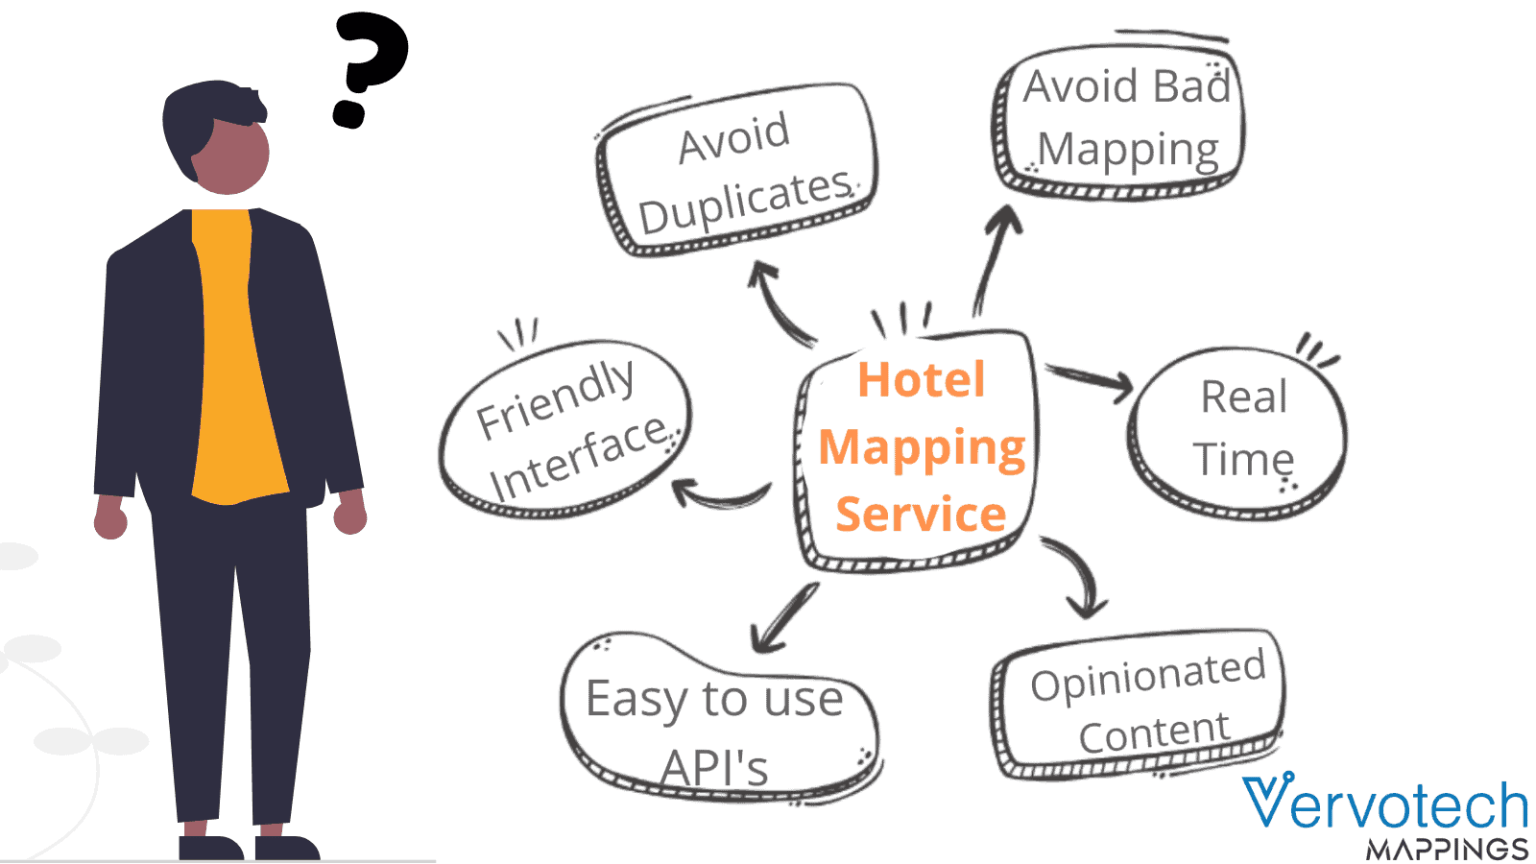 How to choose a Hotel Mapping Service?